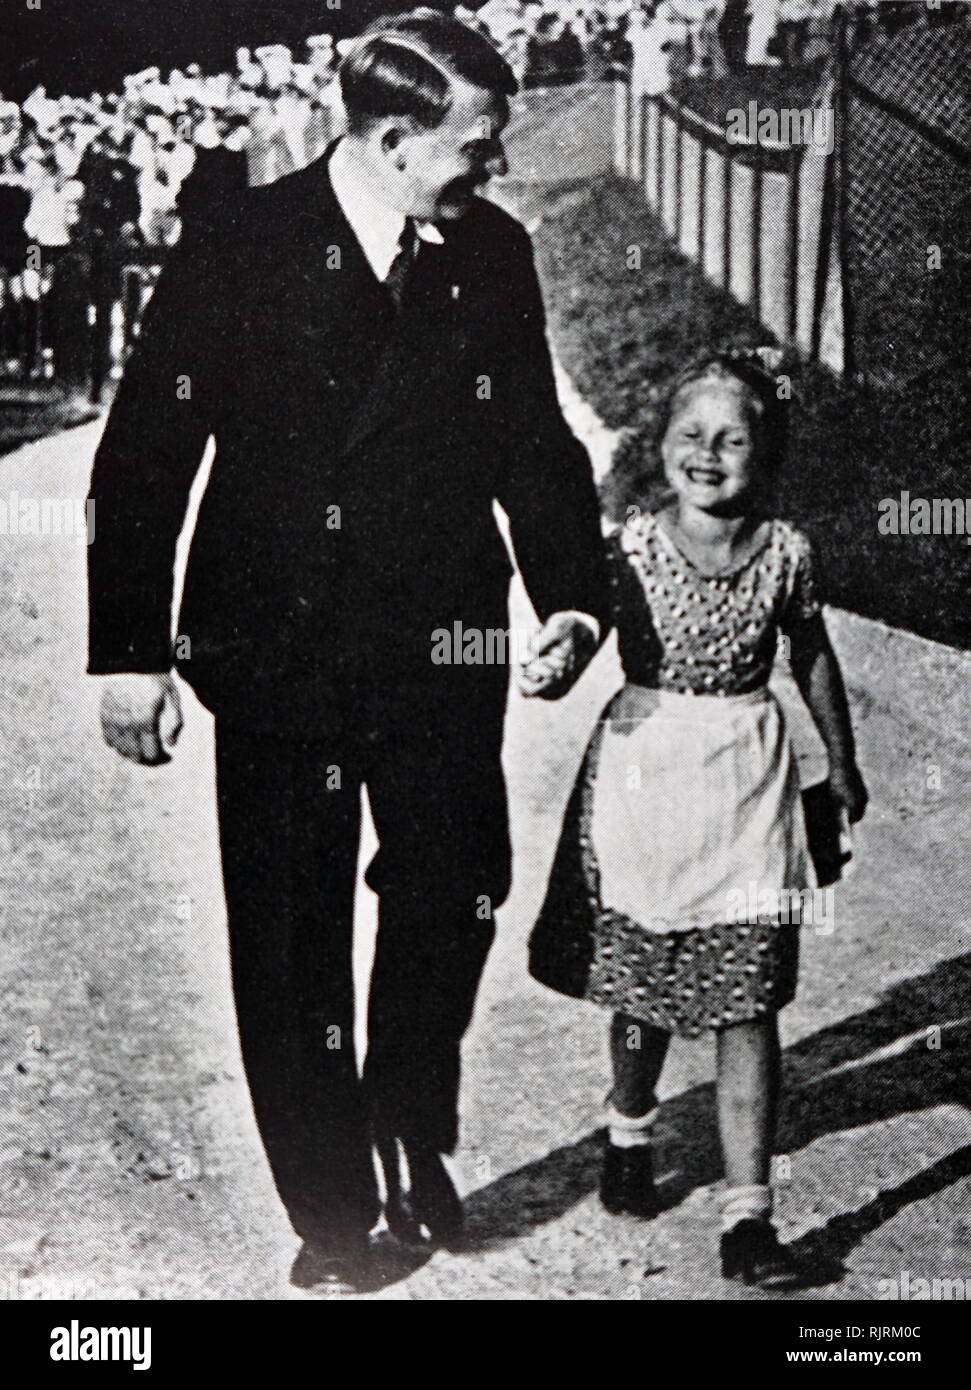 Adolf Hitler (1889 - 1945); German politician, demagogue. leader of the Nazi Party, with a typical Aryan child. Germany as Chancellor in 1933 and Fuhrer ('Leader') in 1934. dictator of Nazi Germany from 1933 to 1945, Stock Photo